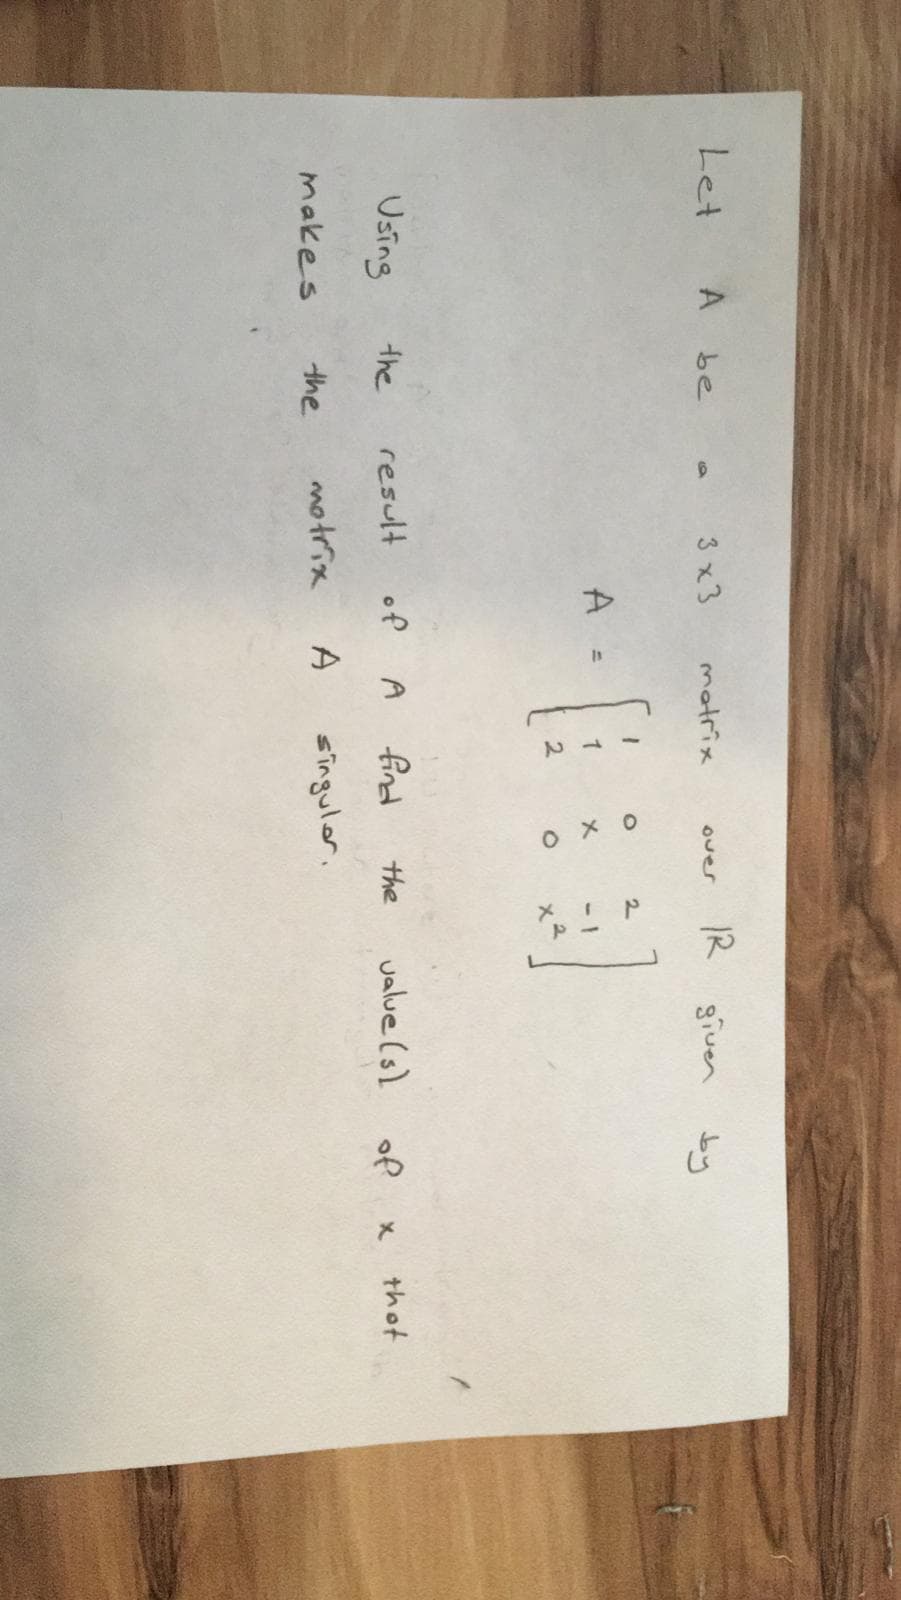 Let
A be
3 x3
R given
matrix
by
over
2.
A =
-1
Using
the
result
of
A find
the
value (s)
of
makes
the
motrix
A
singulor.
